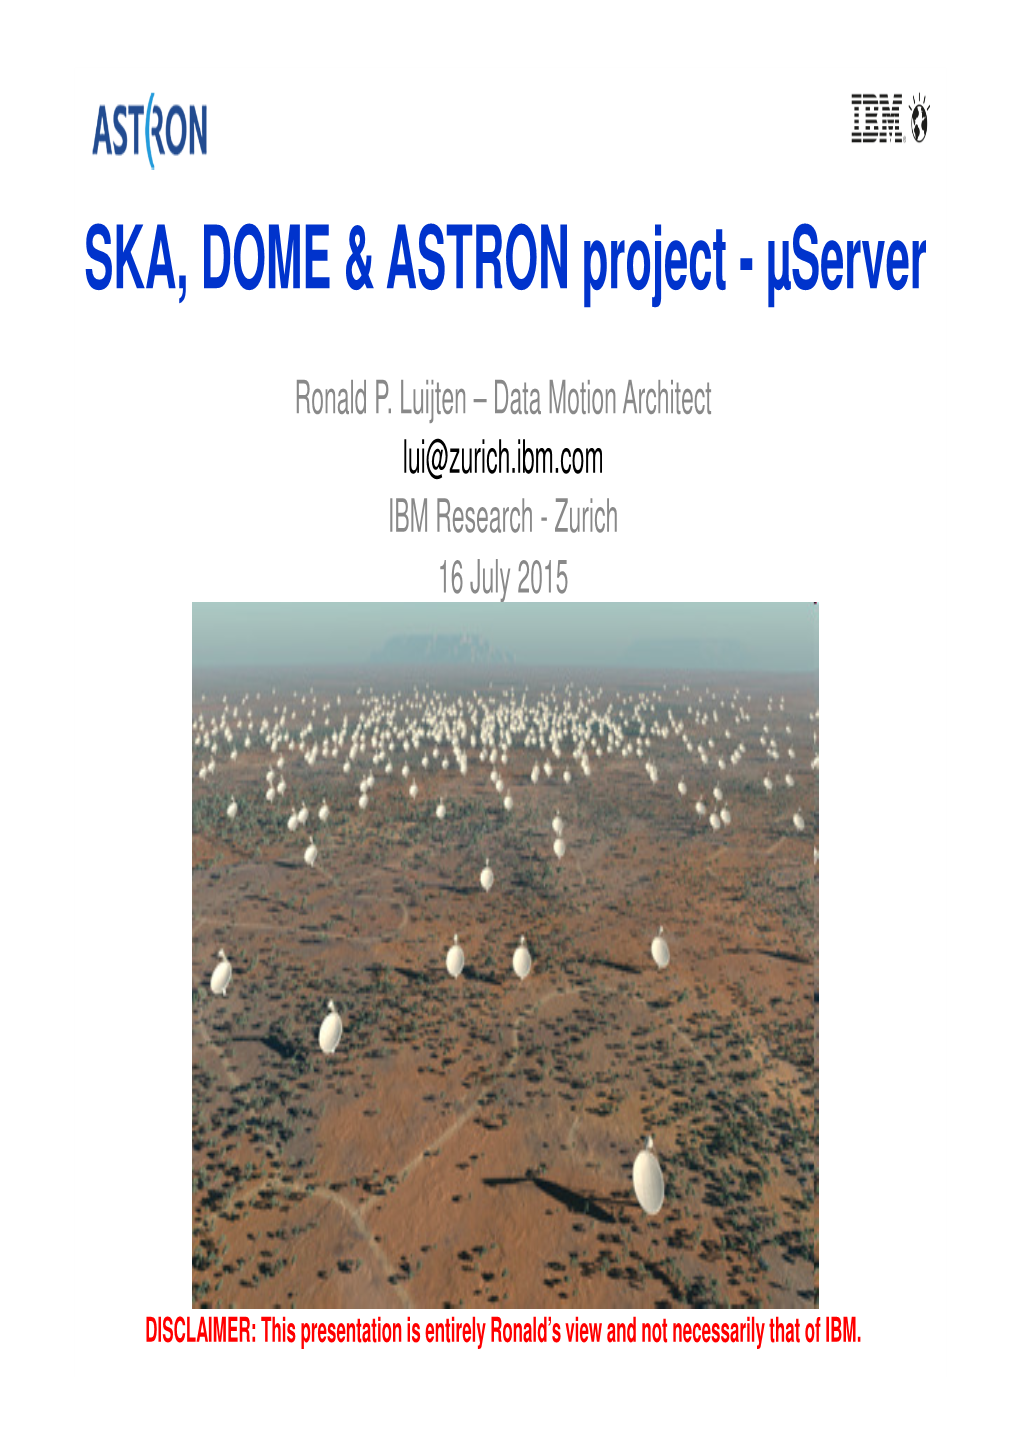 SKA, DOME & ASTRON Project